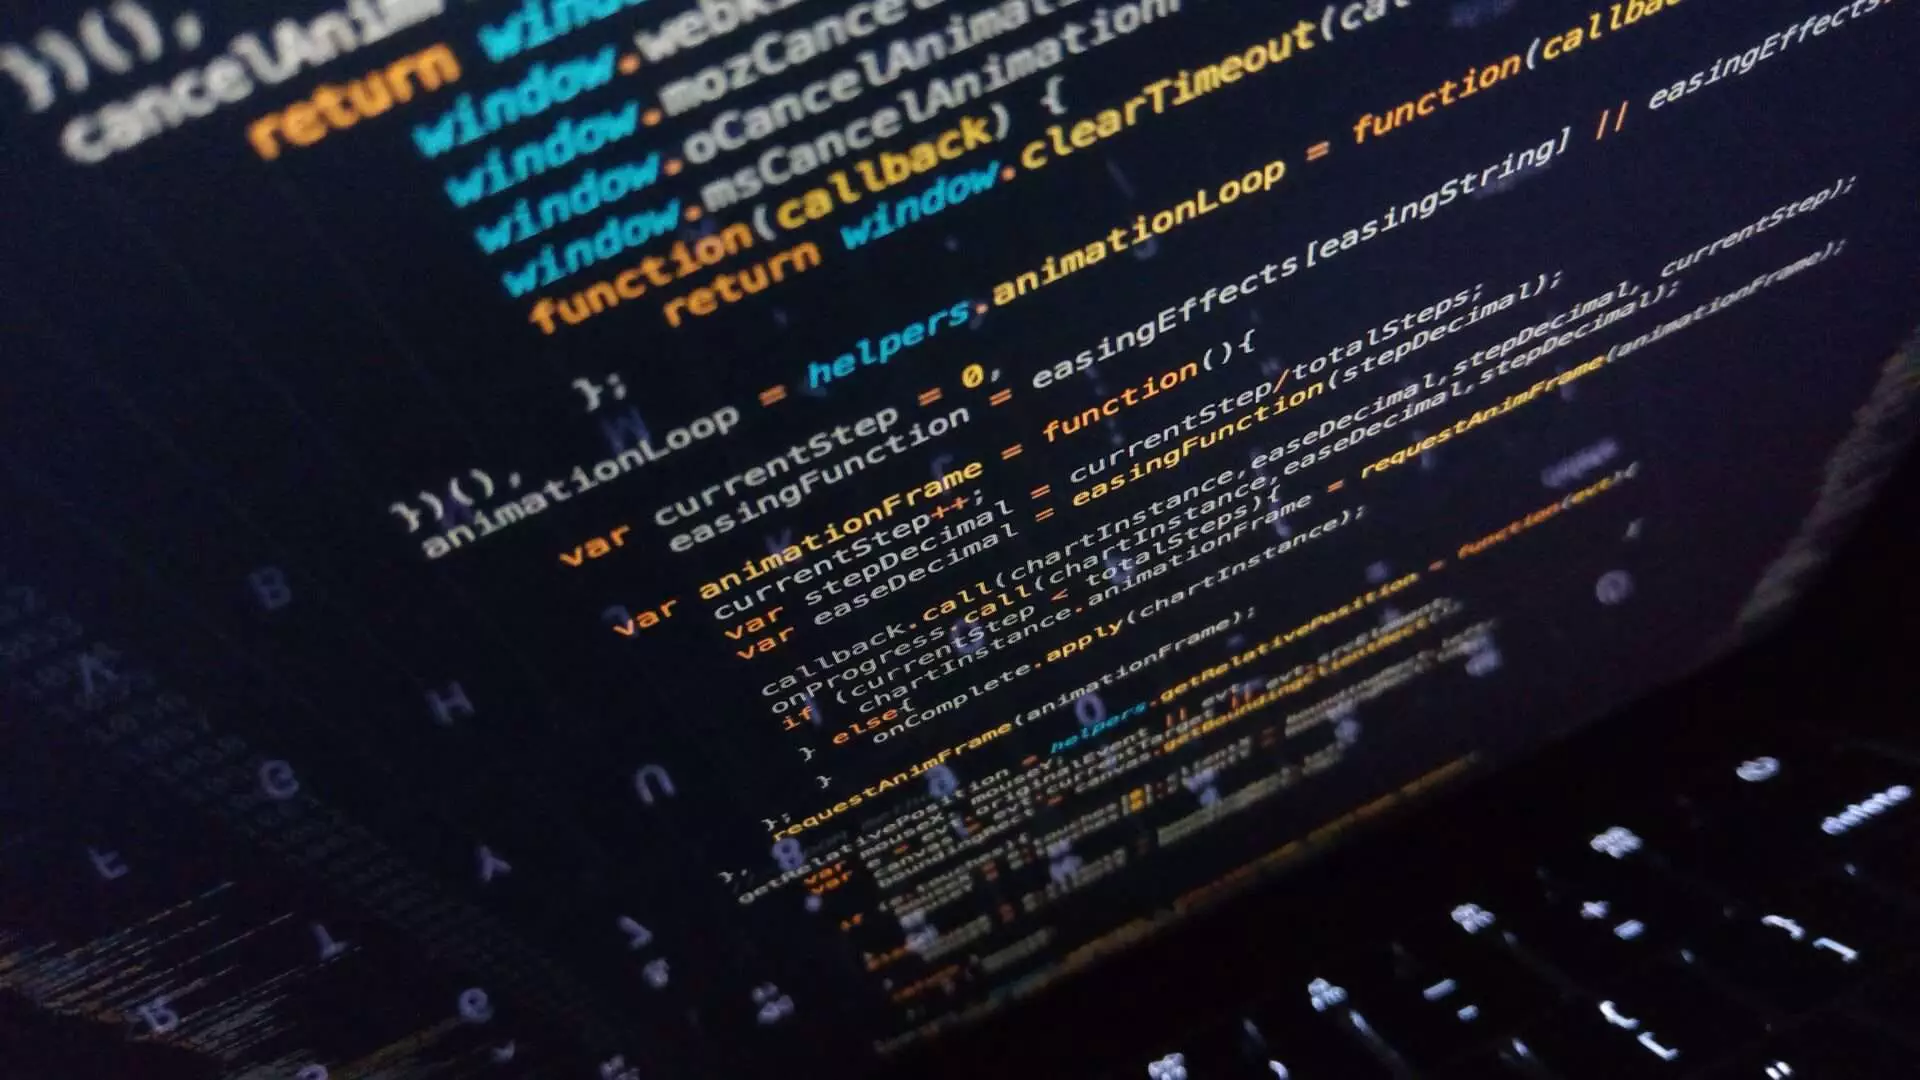 Computer code on a partially closed laptop screen. Photographed by Irvan Smith on Unsplash.